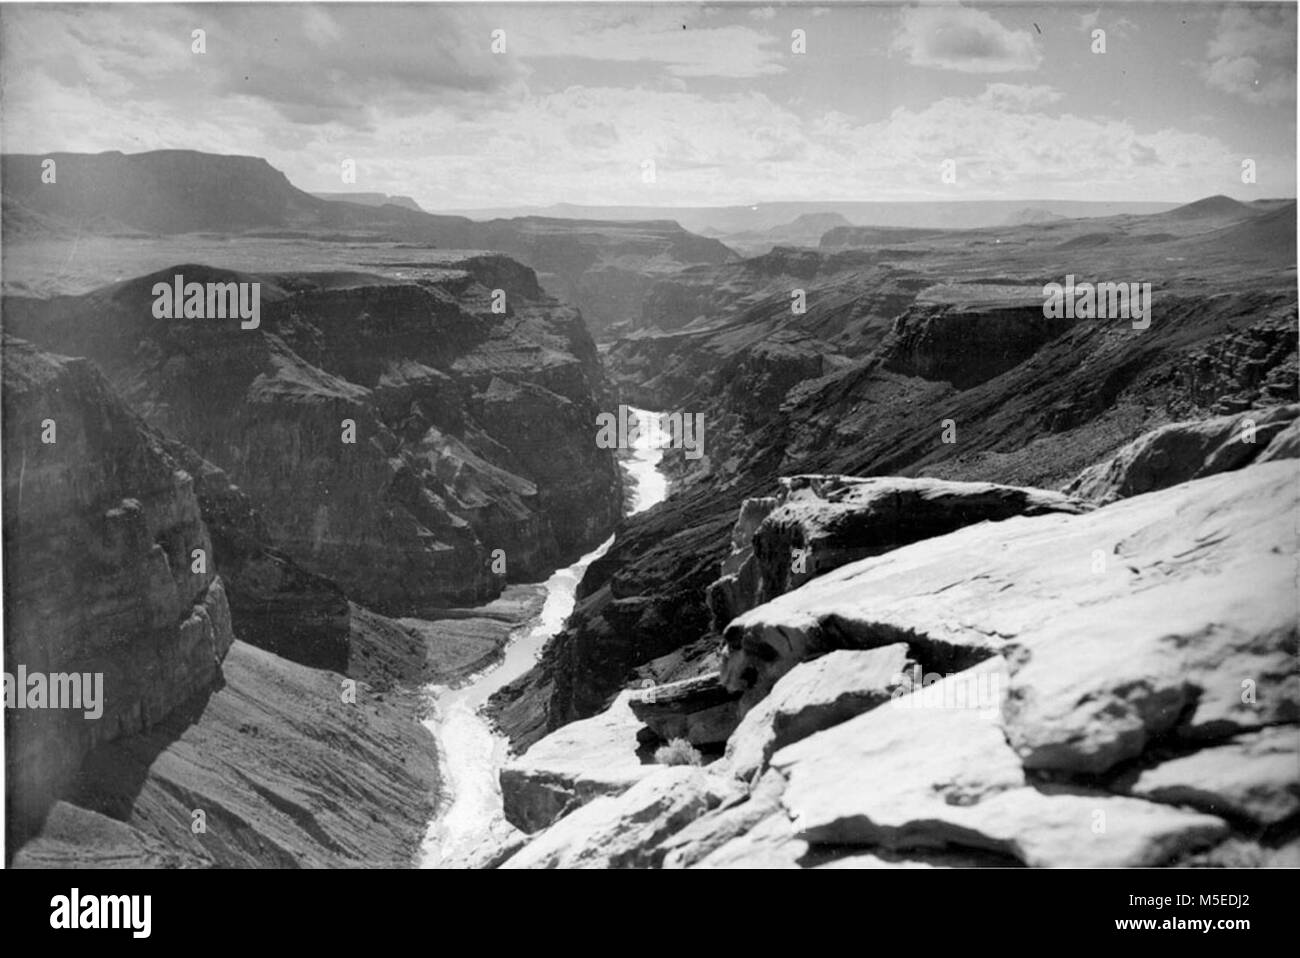 Grand Canyon ToroweapTuweep  LOOKING DOWN THE COLORADO RIVER (WEST) FROM TUWEEP POINT, GRAND CANYON NATIONAL MONUMENT.  LAVA FALLS RAPID IS AT MOUTH OF CANYON ENTERING FROM LEFT, OPPOSITE LAVA FLOW VISIBLE IN MOUTH OF TUWEEP VALLEY ON RIGHT.   CIRCA 1951.   . Stock Photo